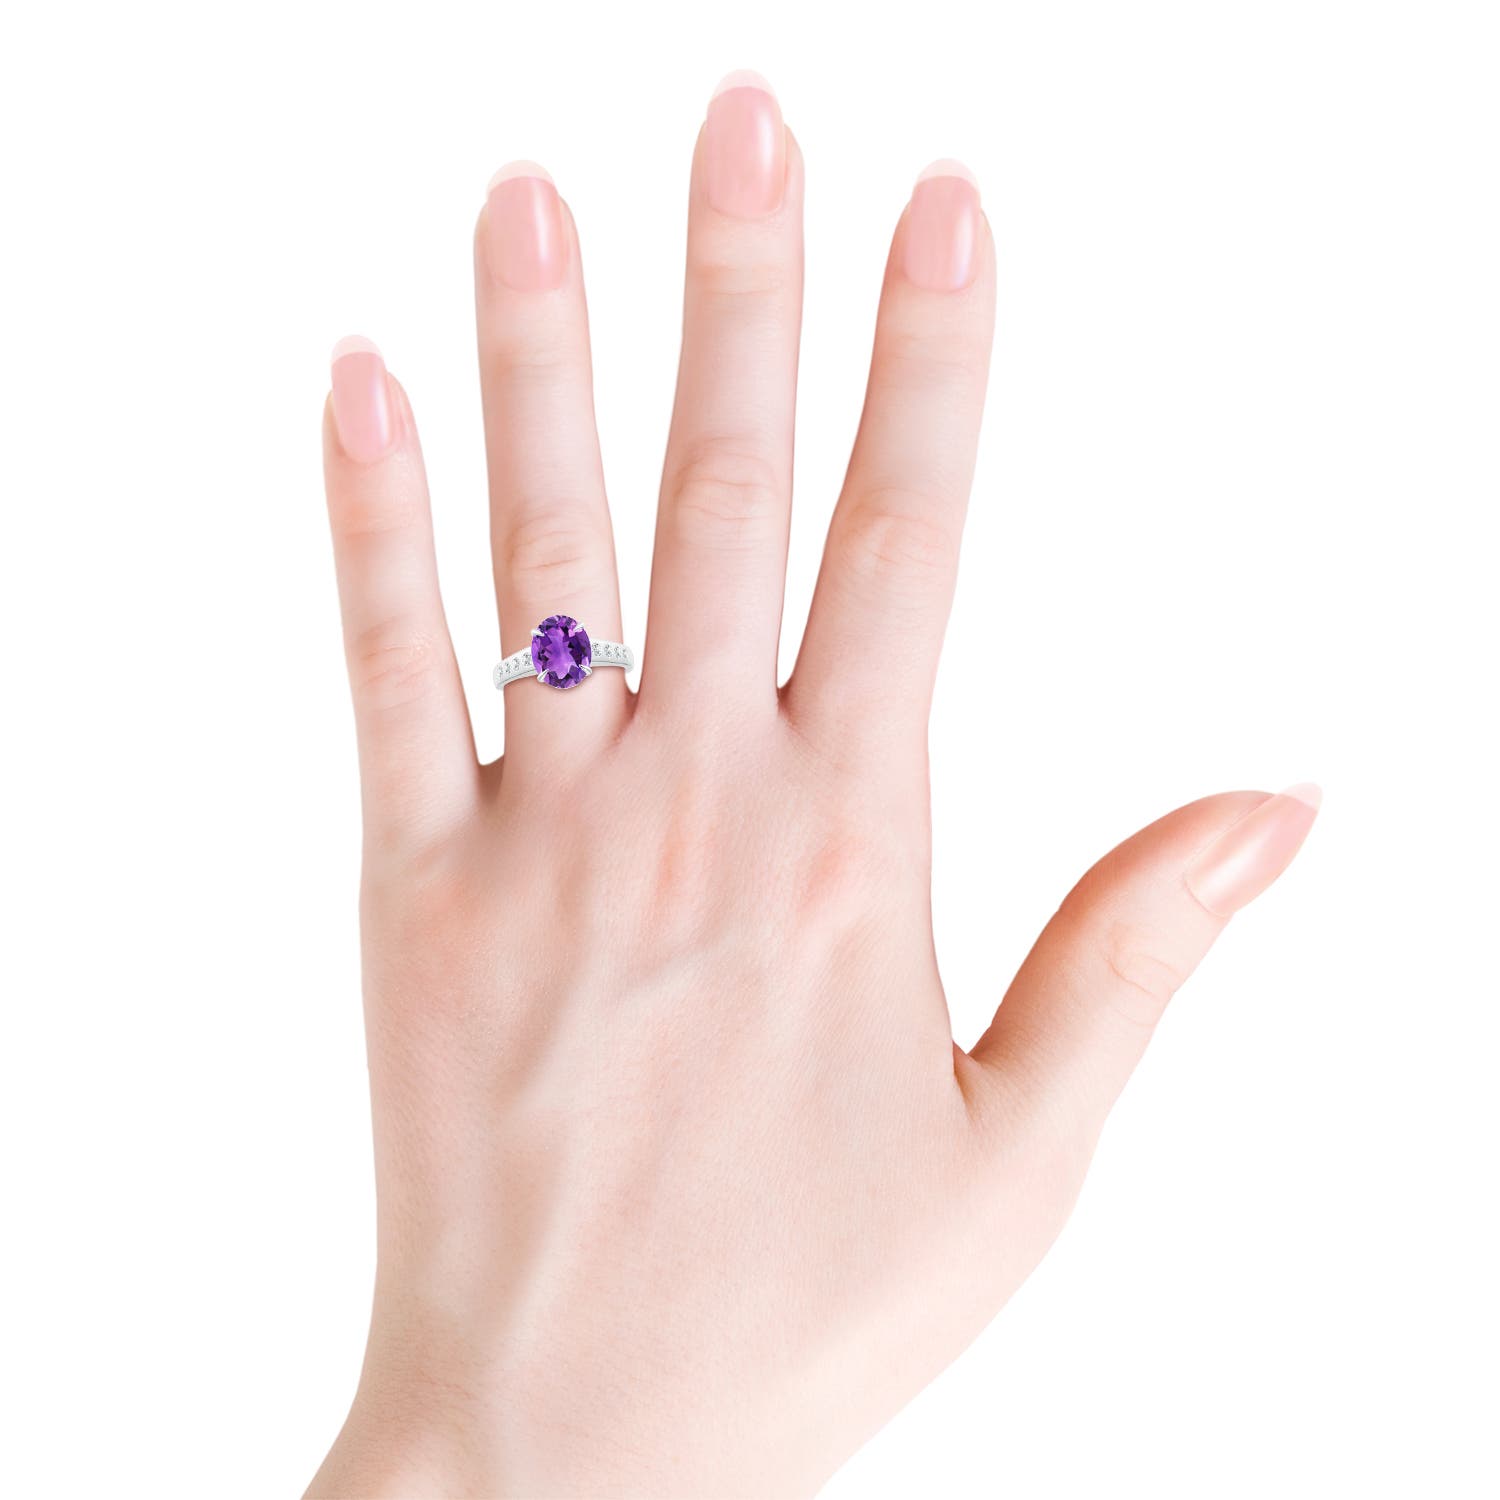 AAA - Amethyst / 2.5 CT / 14 KT White Gold